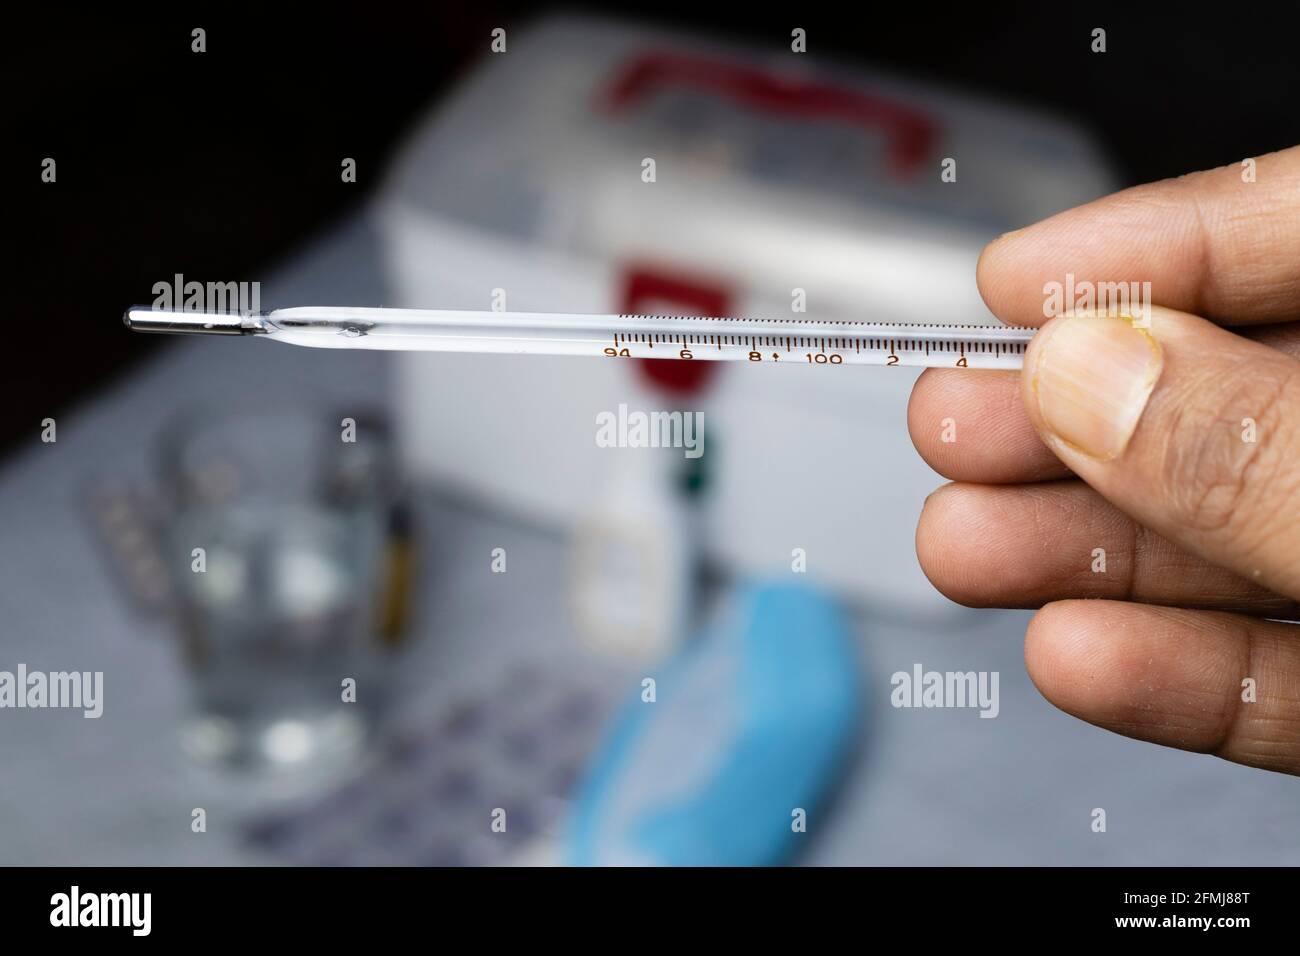 Selective focus on an analog thermometer held in human hand with medicine on background Stock Photo